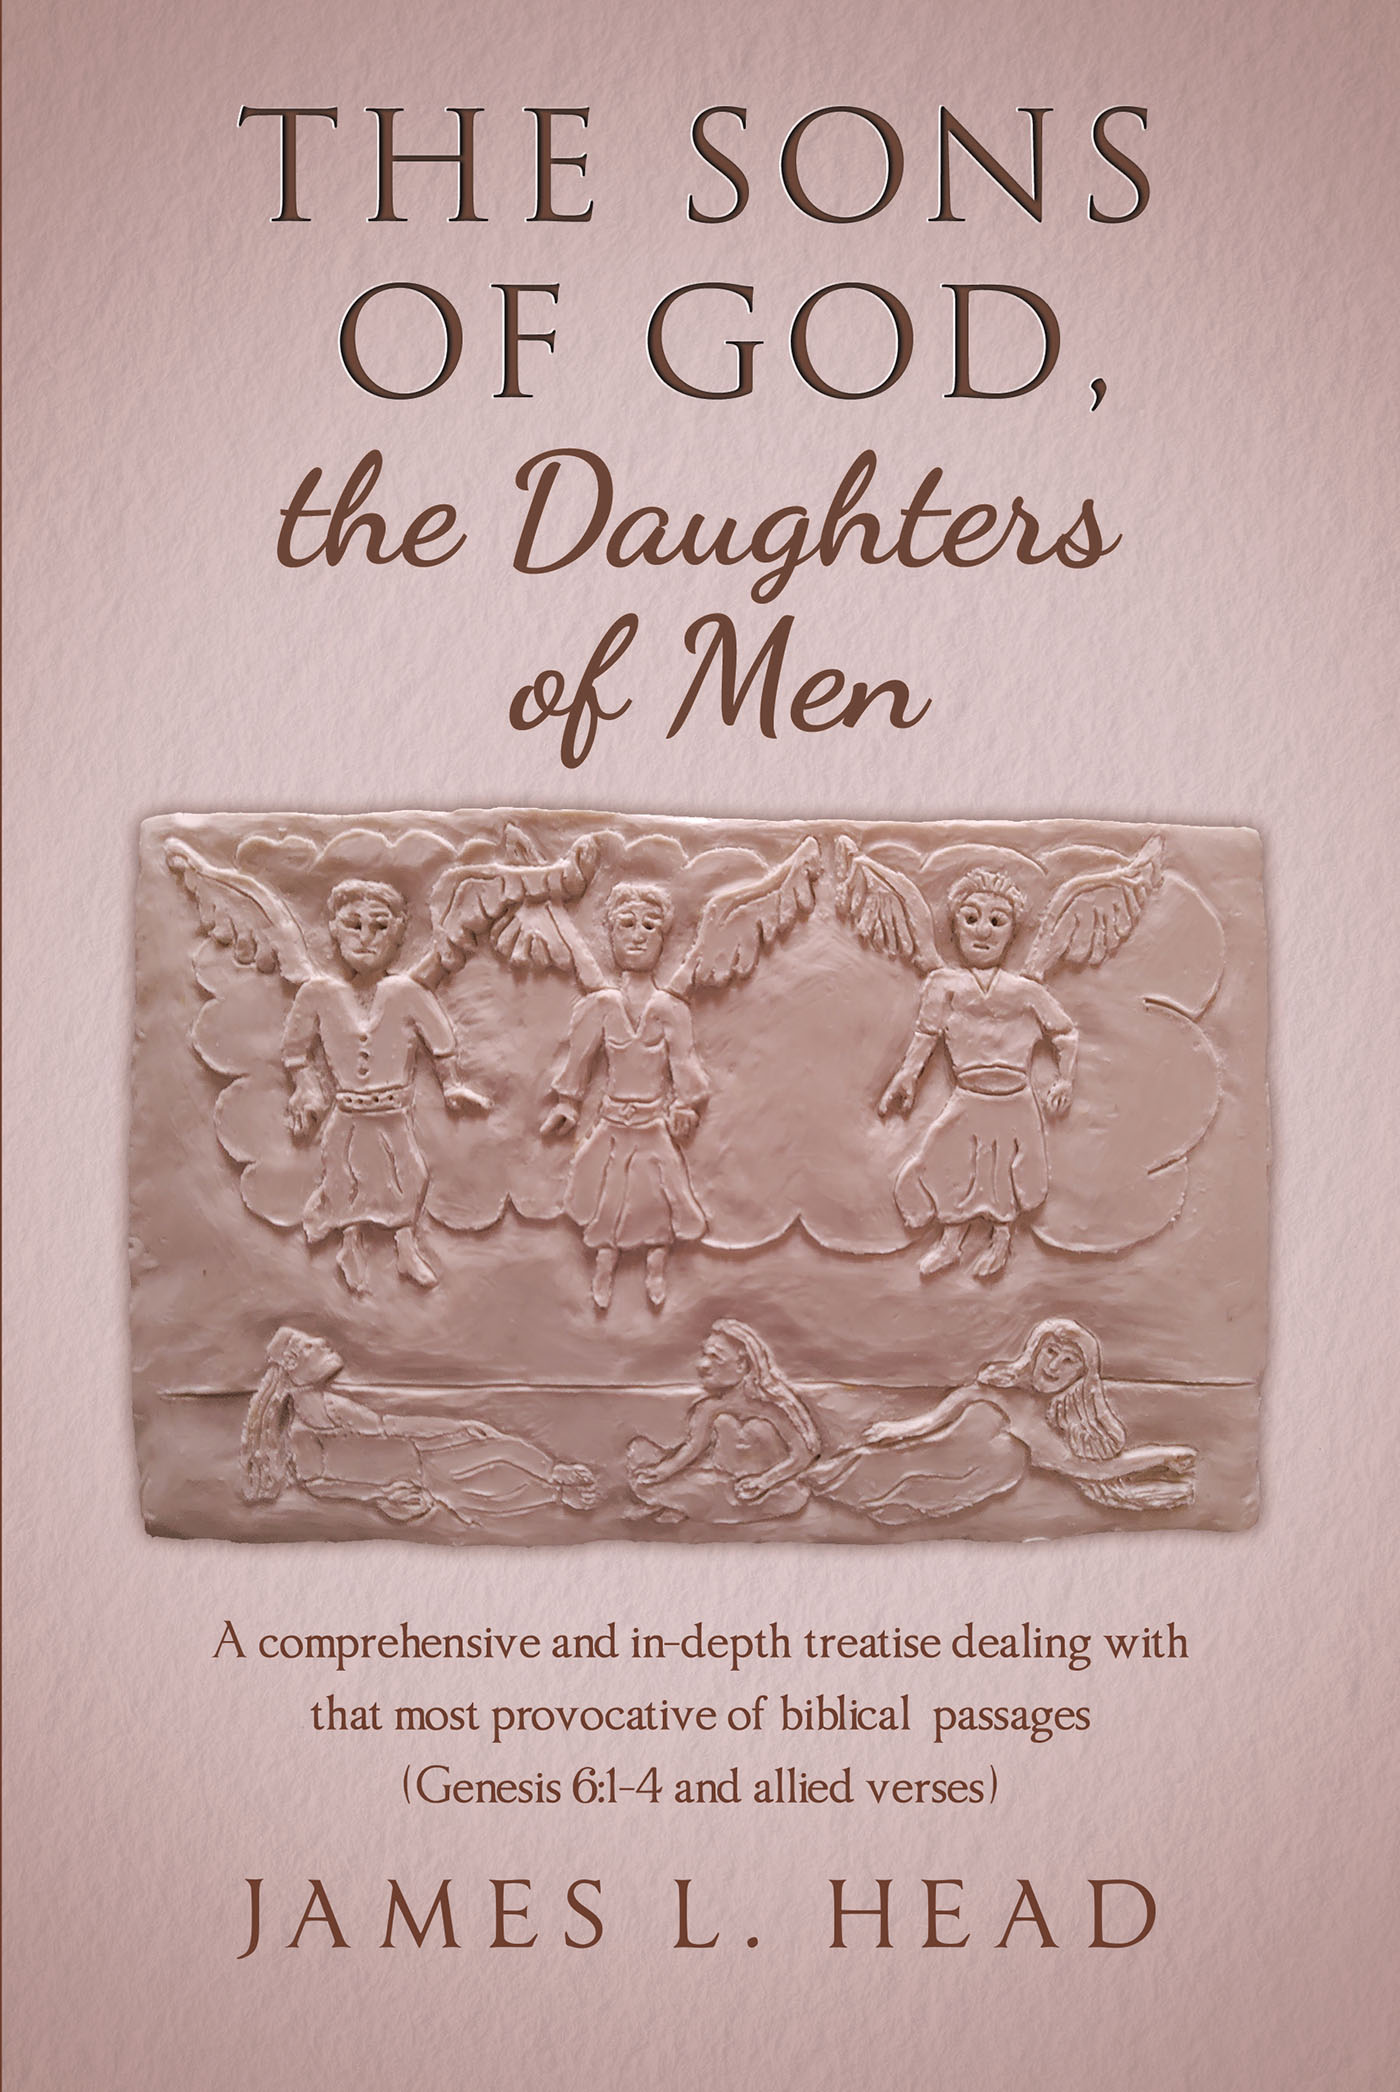 Author James L. Head’s New Book, “The Sons of God, the Daughters of Men,” is a Fascinating Study of Genesis 6:1-4 and Allied Verses